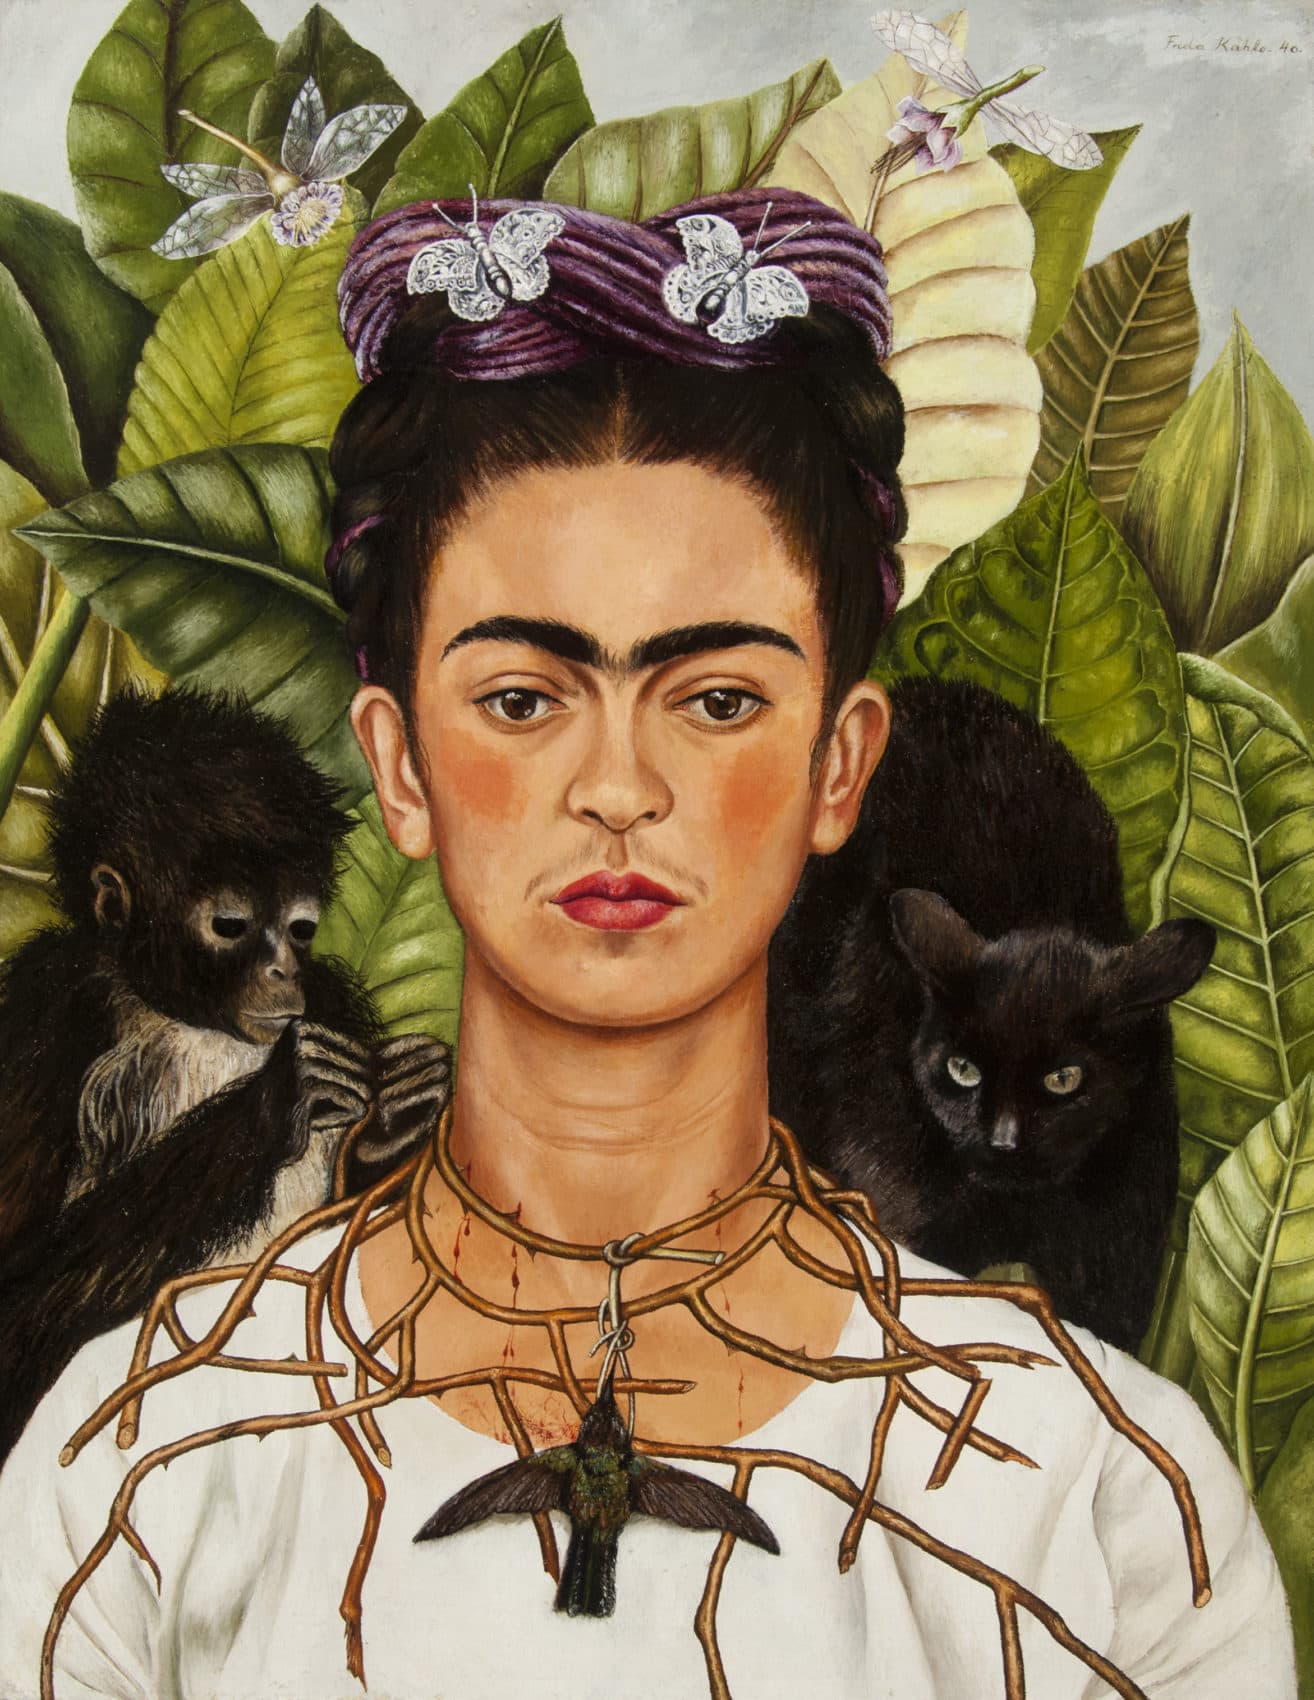 Beyond The Suffering: A Deeper Look Into Frida Kahlo's Necessary Artistry